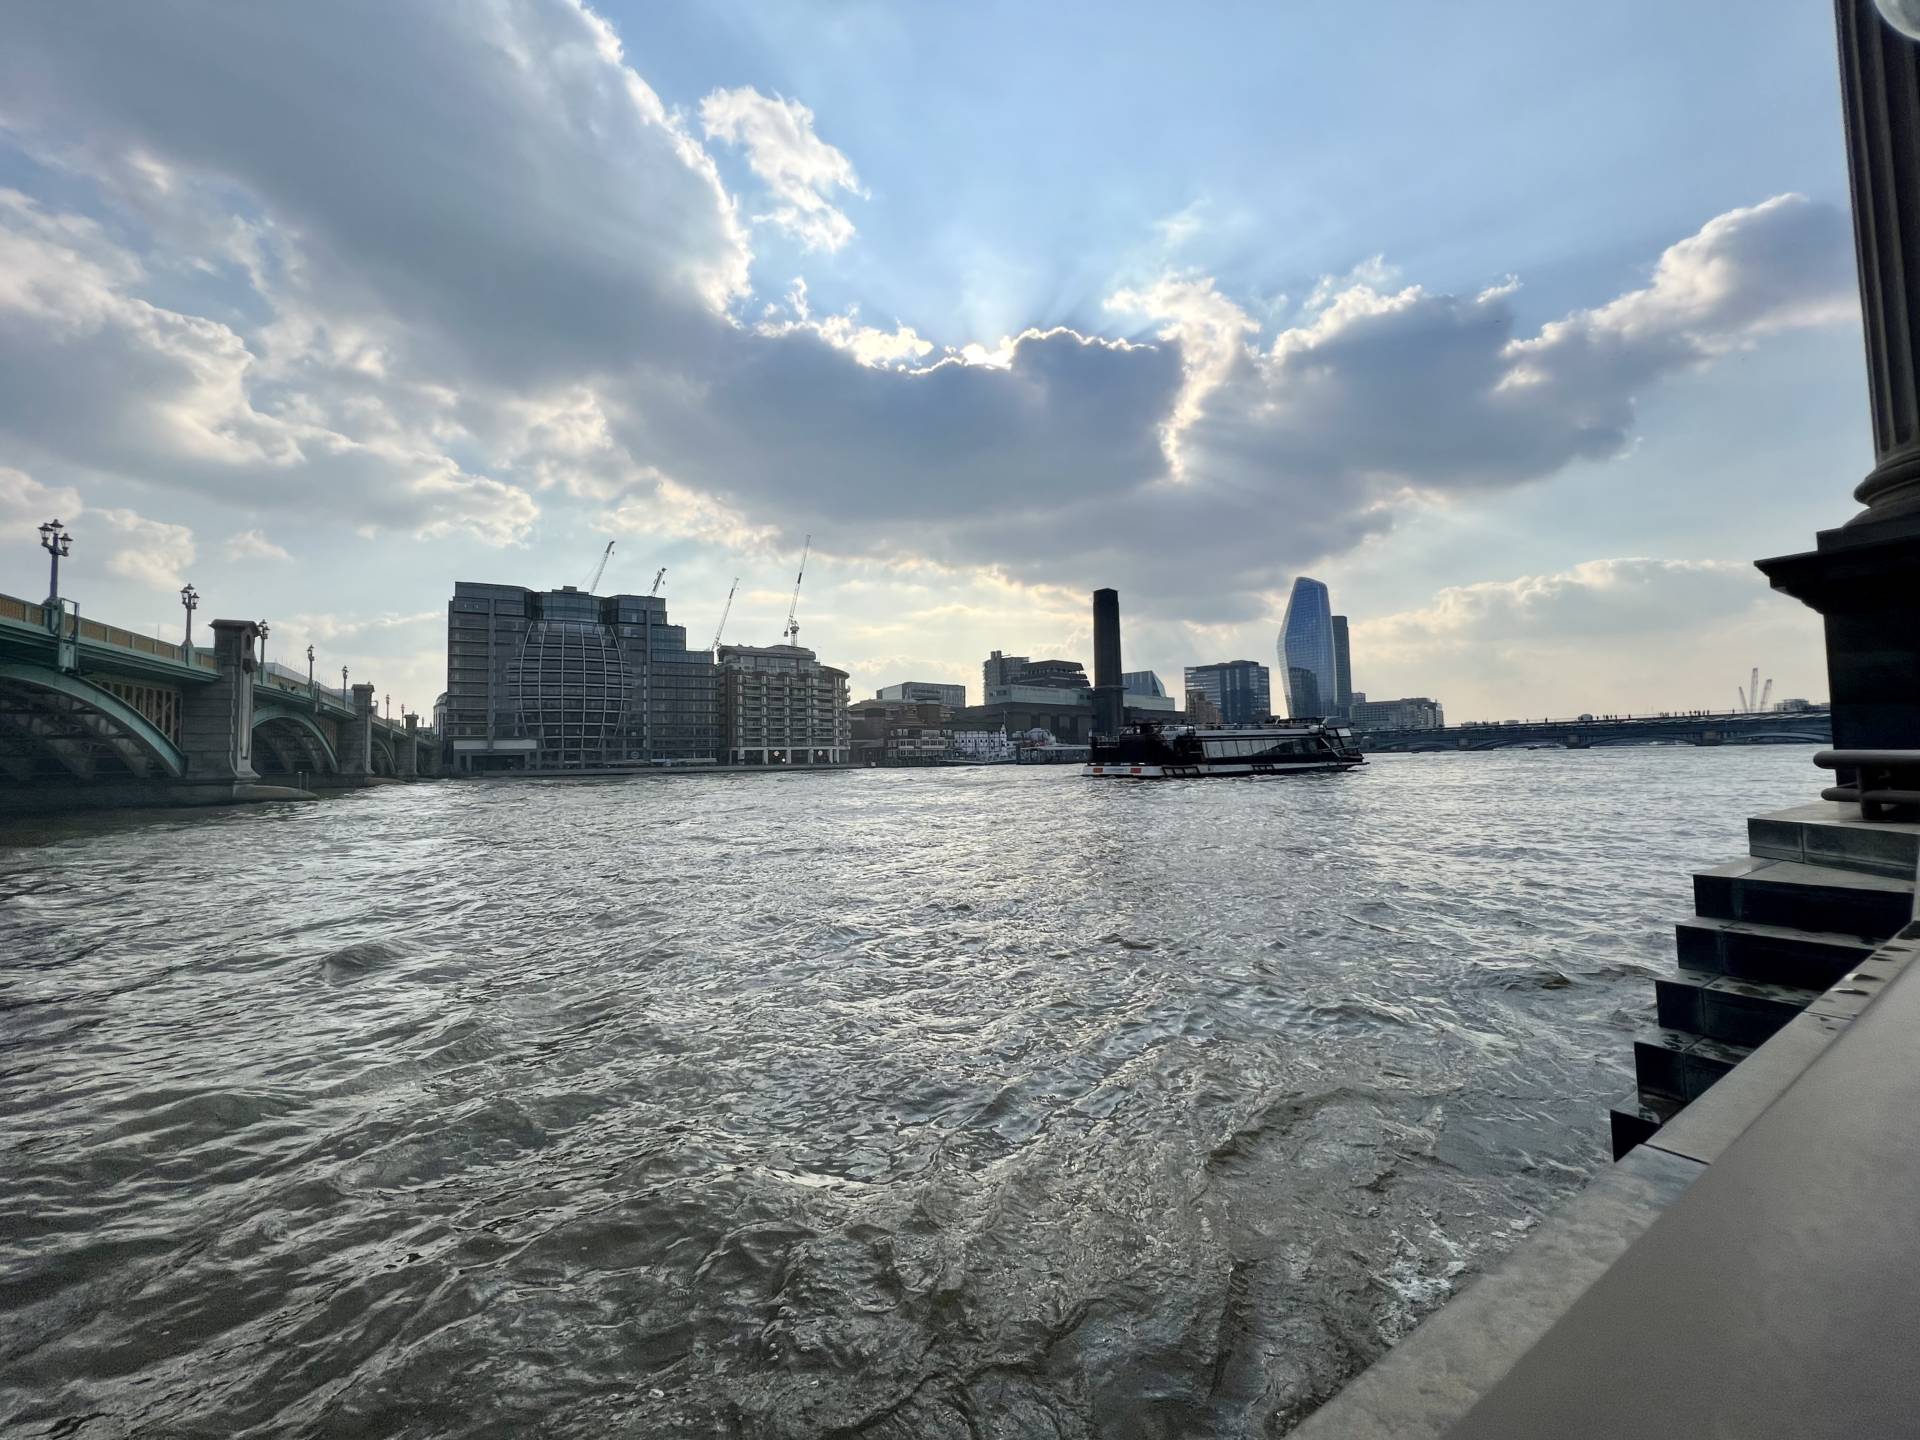 View of southbank from North of the river Thames